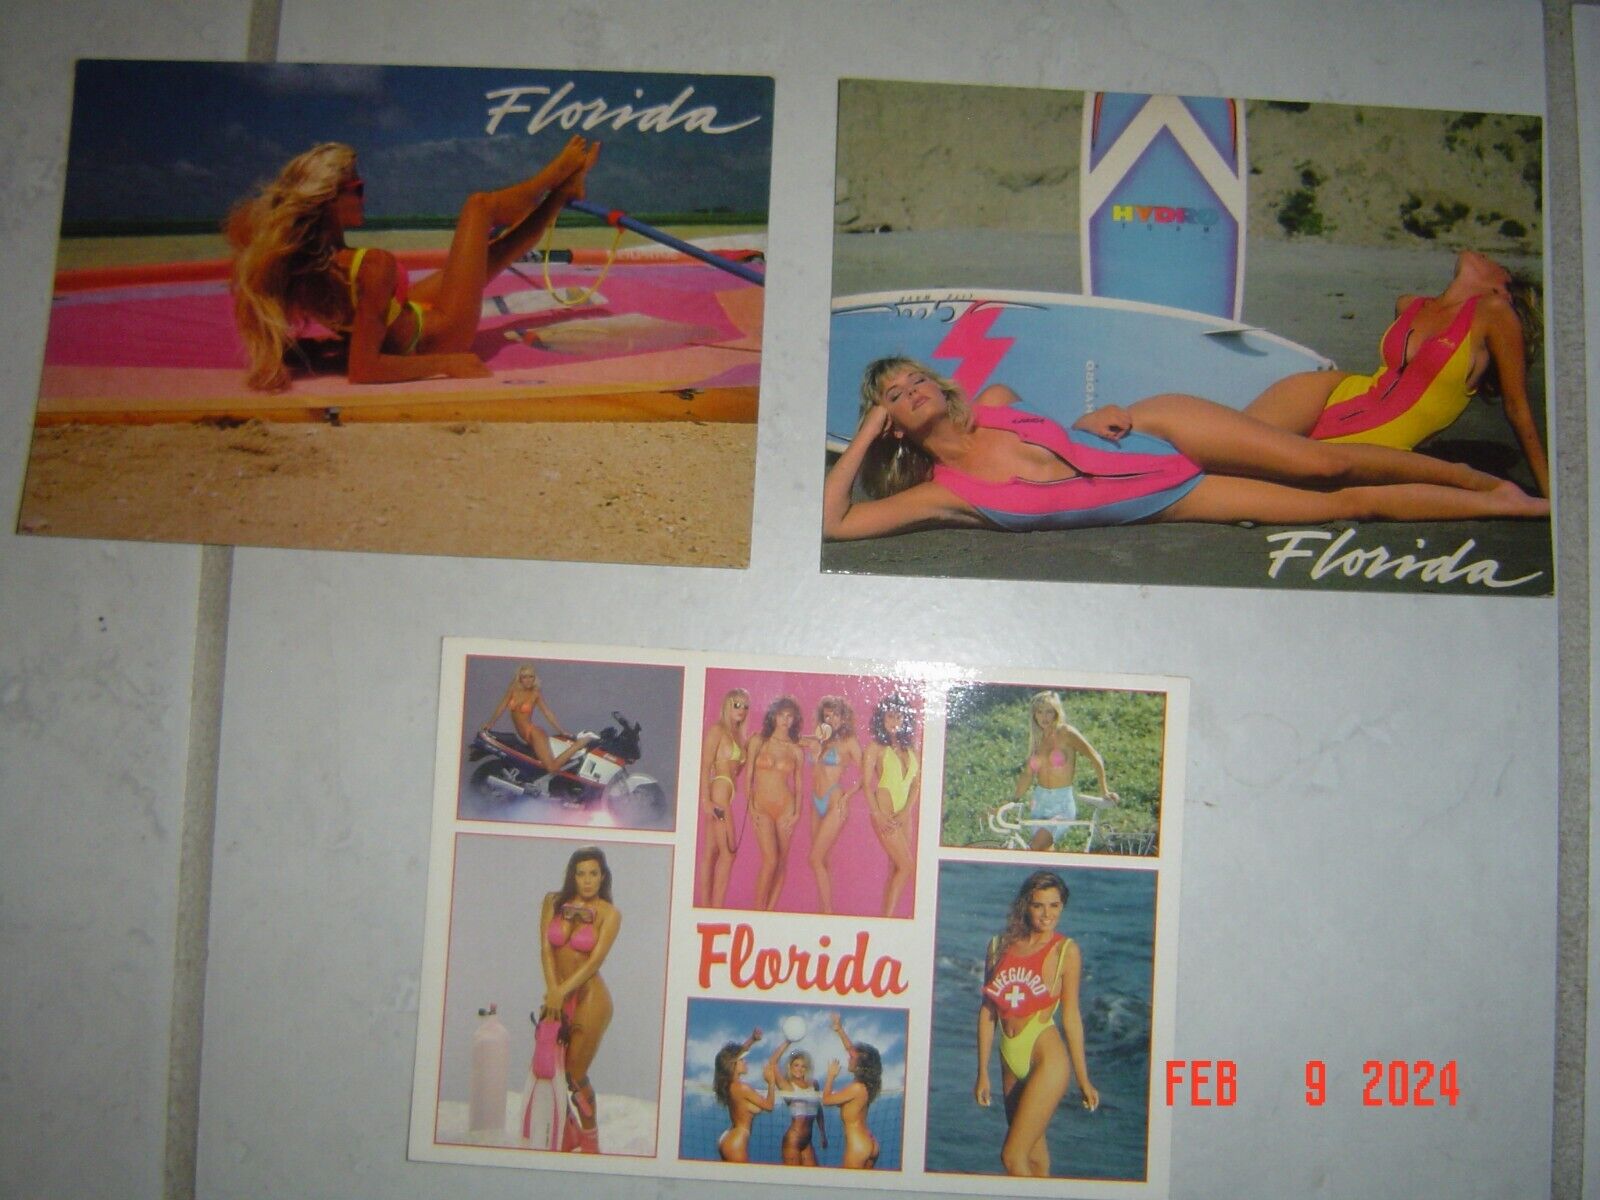 Sexy Florida Postcards (4.5-in x 6.5-in) with ladies in swimsuits - lot of 3